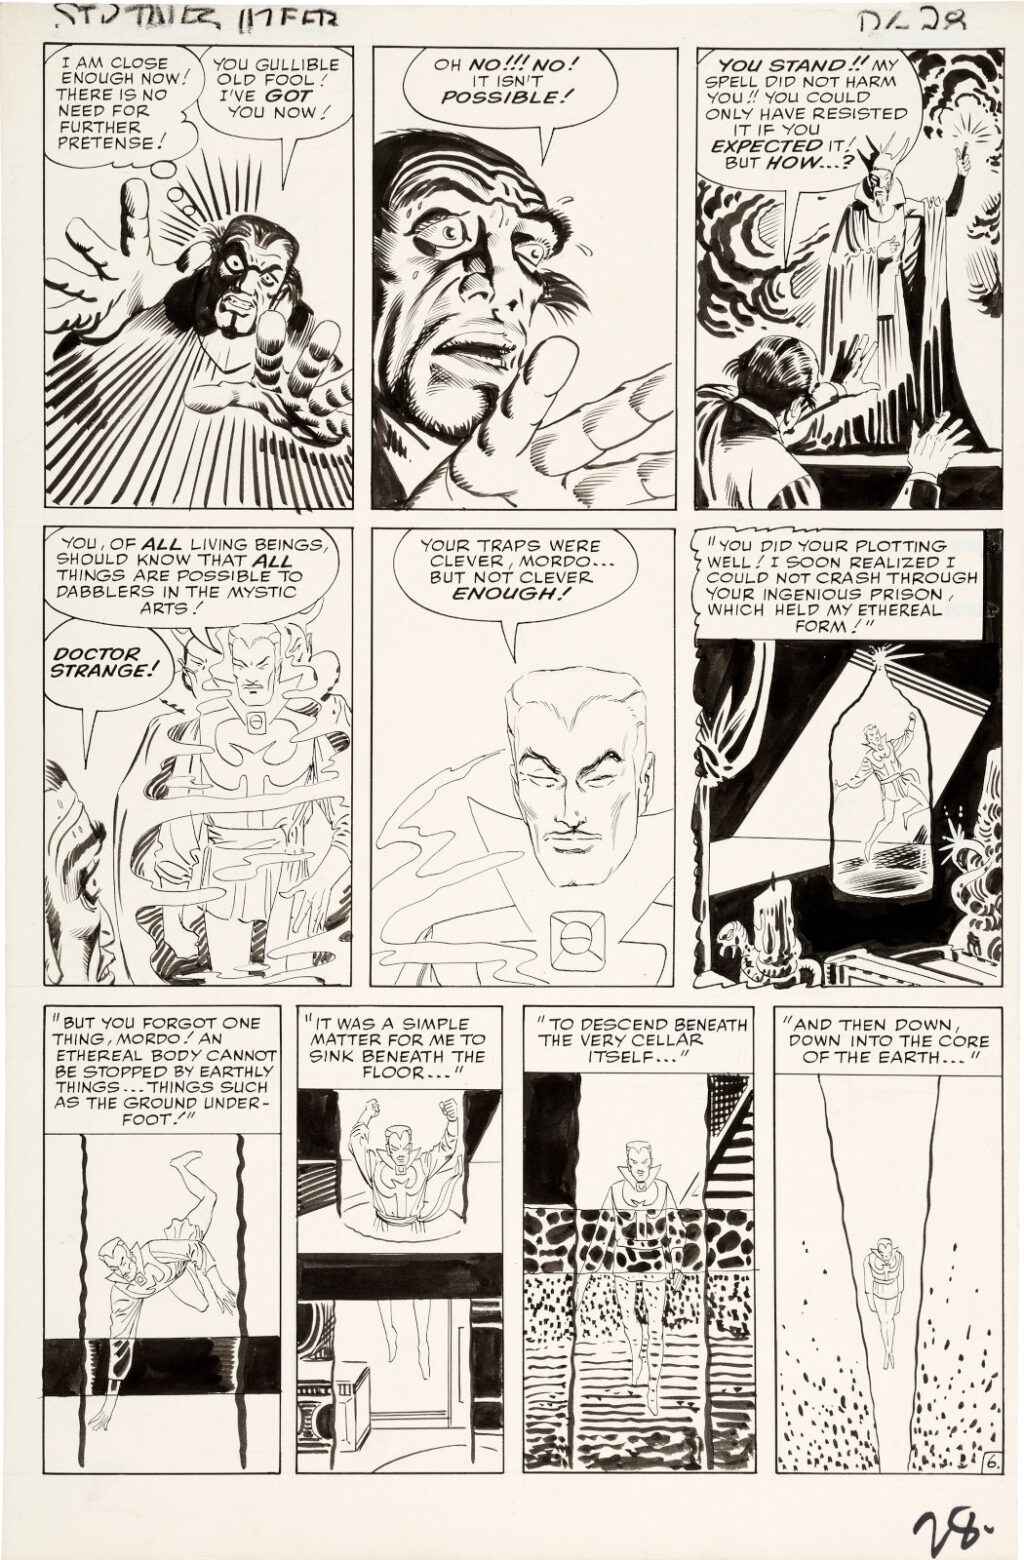 Strange Tales issue 117 page 6 by Steve Ditko